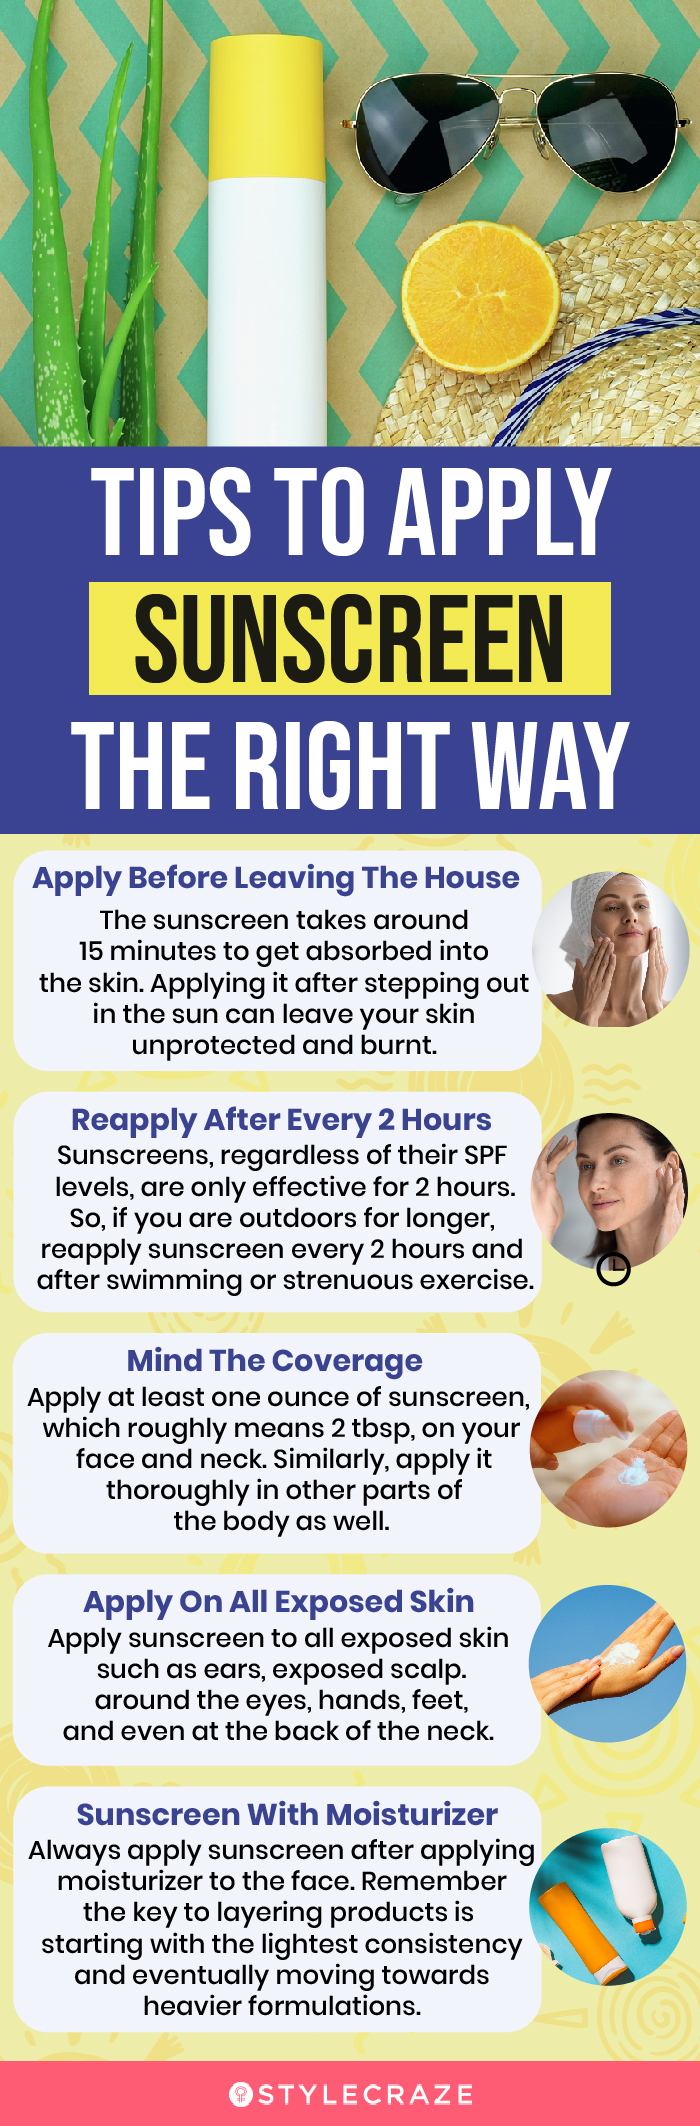 Tips To Apply Sunscreen The Right Way (infographic)